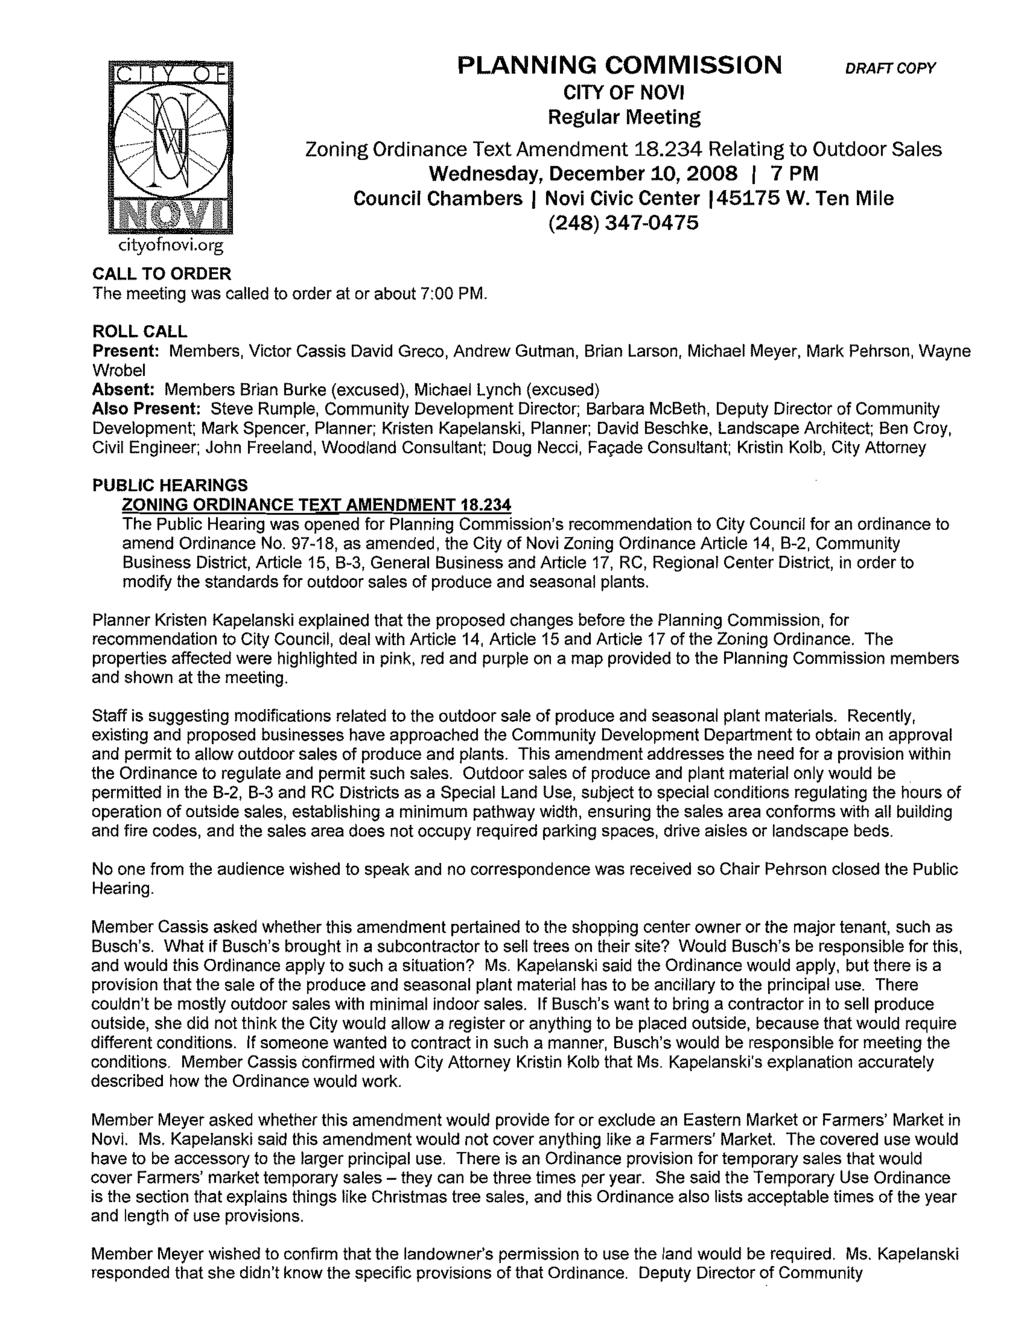 cityofnovi.org CALL TO ORDER The meeting was called to order at or about 7:00 PM. PLANNING COMMISSION CITY OF NOVI Regular Meeting DRAFT COPY Zoning Ordinance Text Amendment 18.